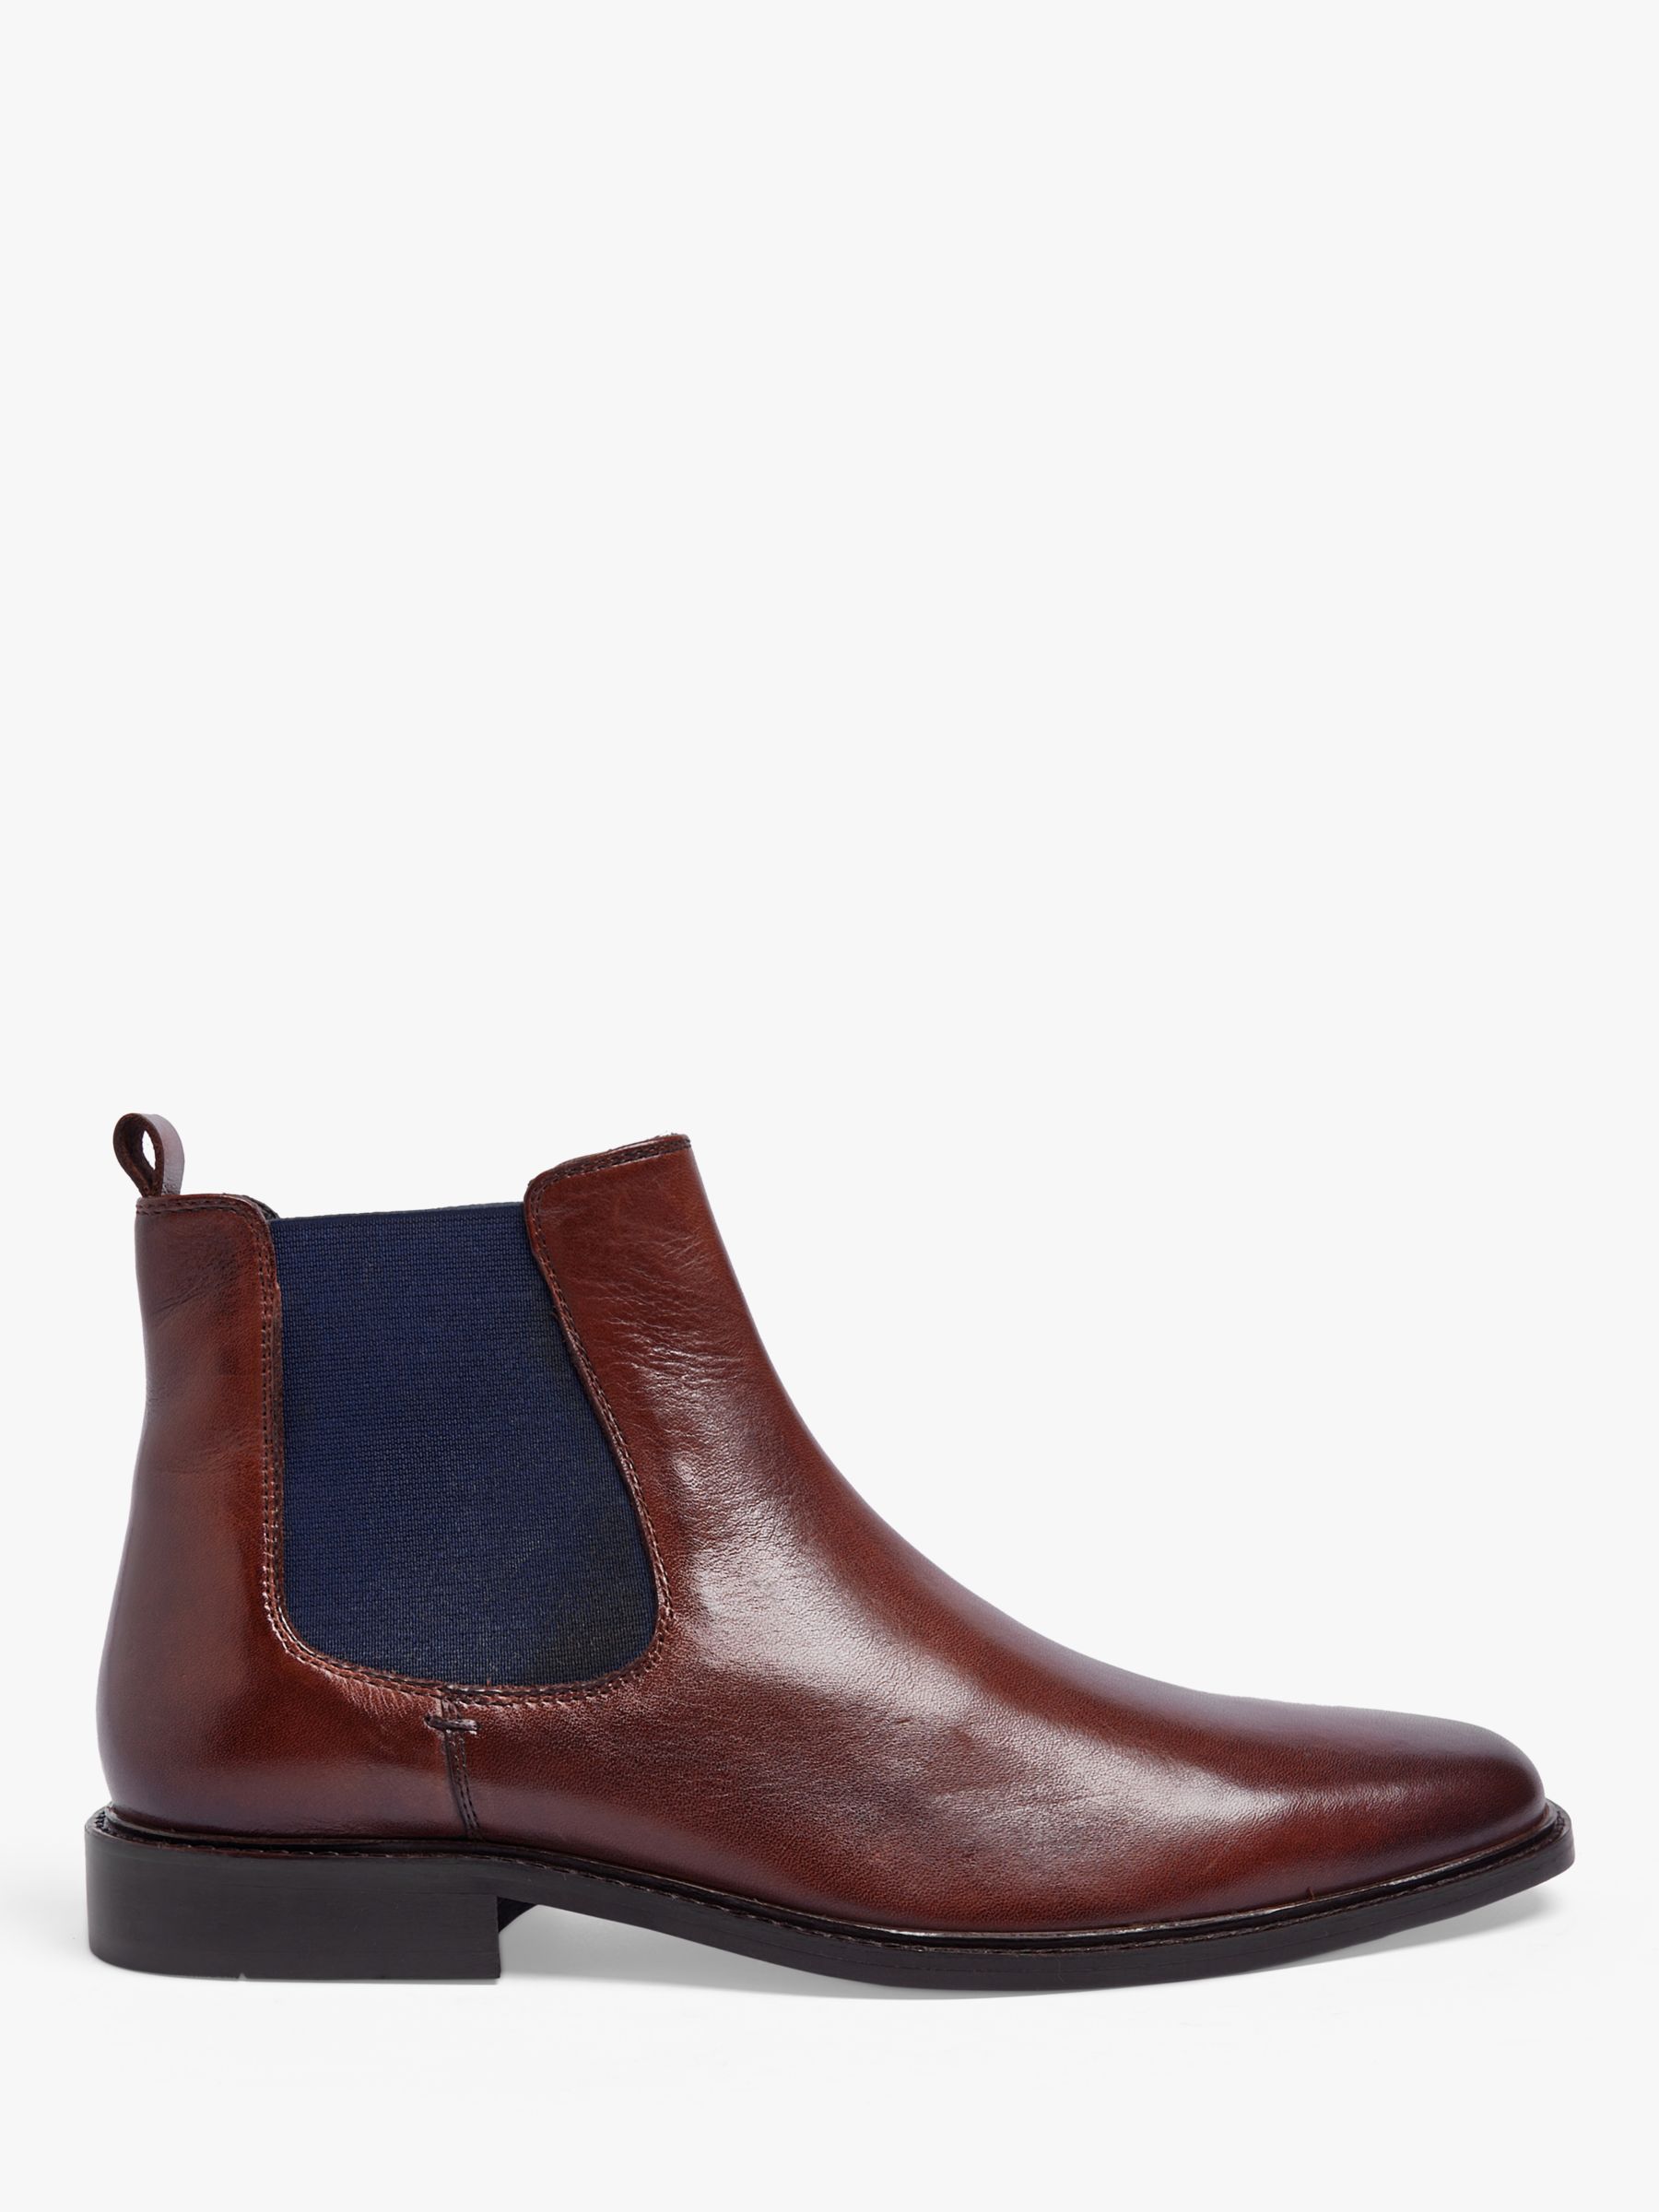 Pod Birch Leather Chelsea Boots, Chestnut at John Lewis & Partners